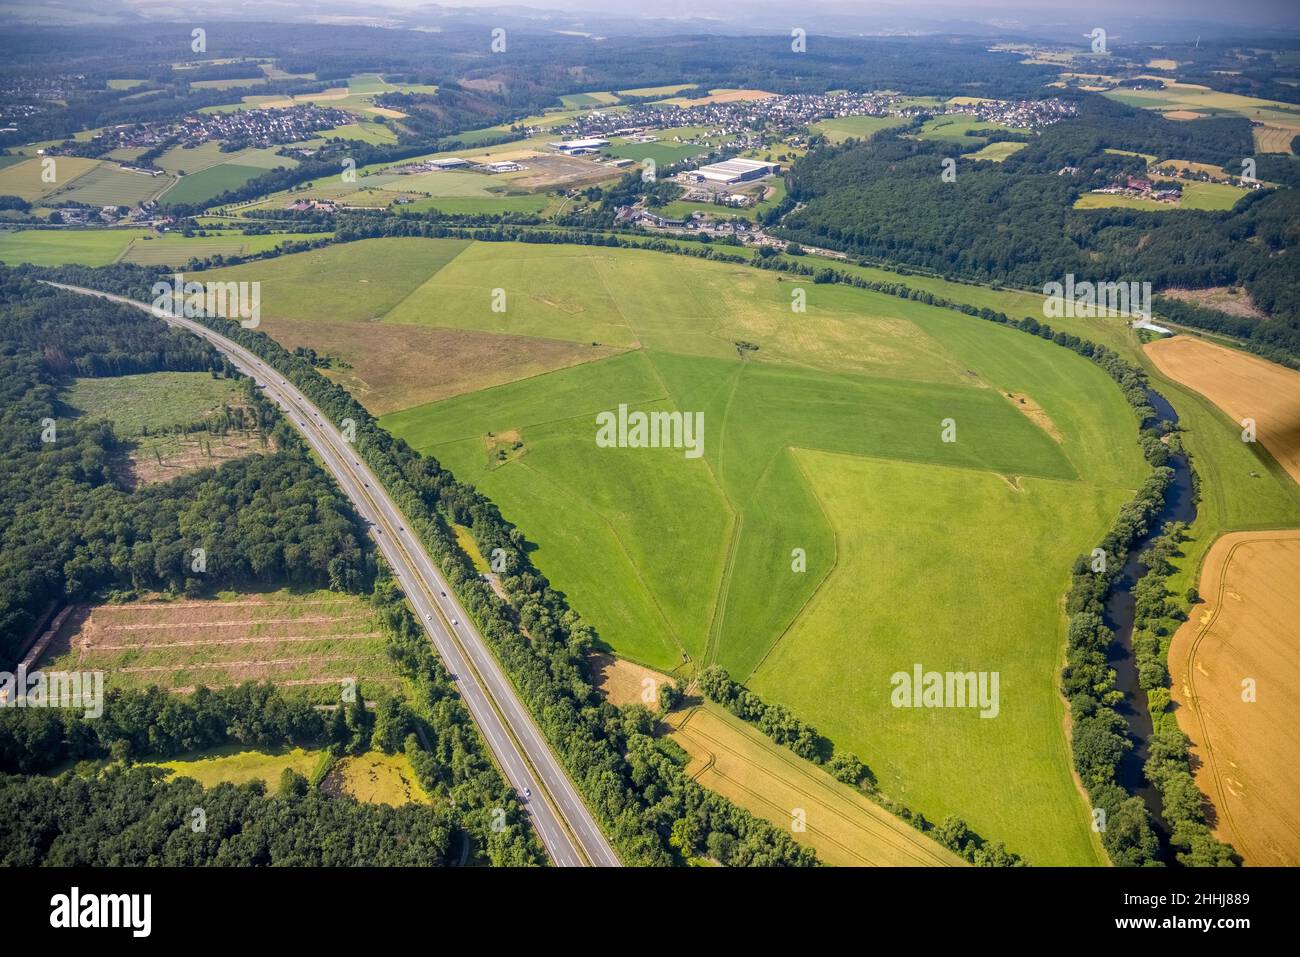 Aerial view, forest area with forest damage, A445 motorway and Ruhr floodplain with river Ruhr in Hünningen, Ense, Sauerland, North Rhine-Westphalia, Stock Photo